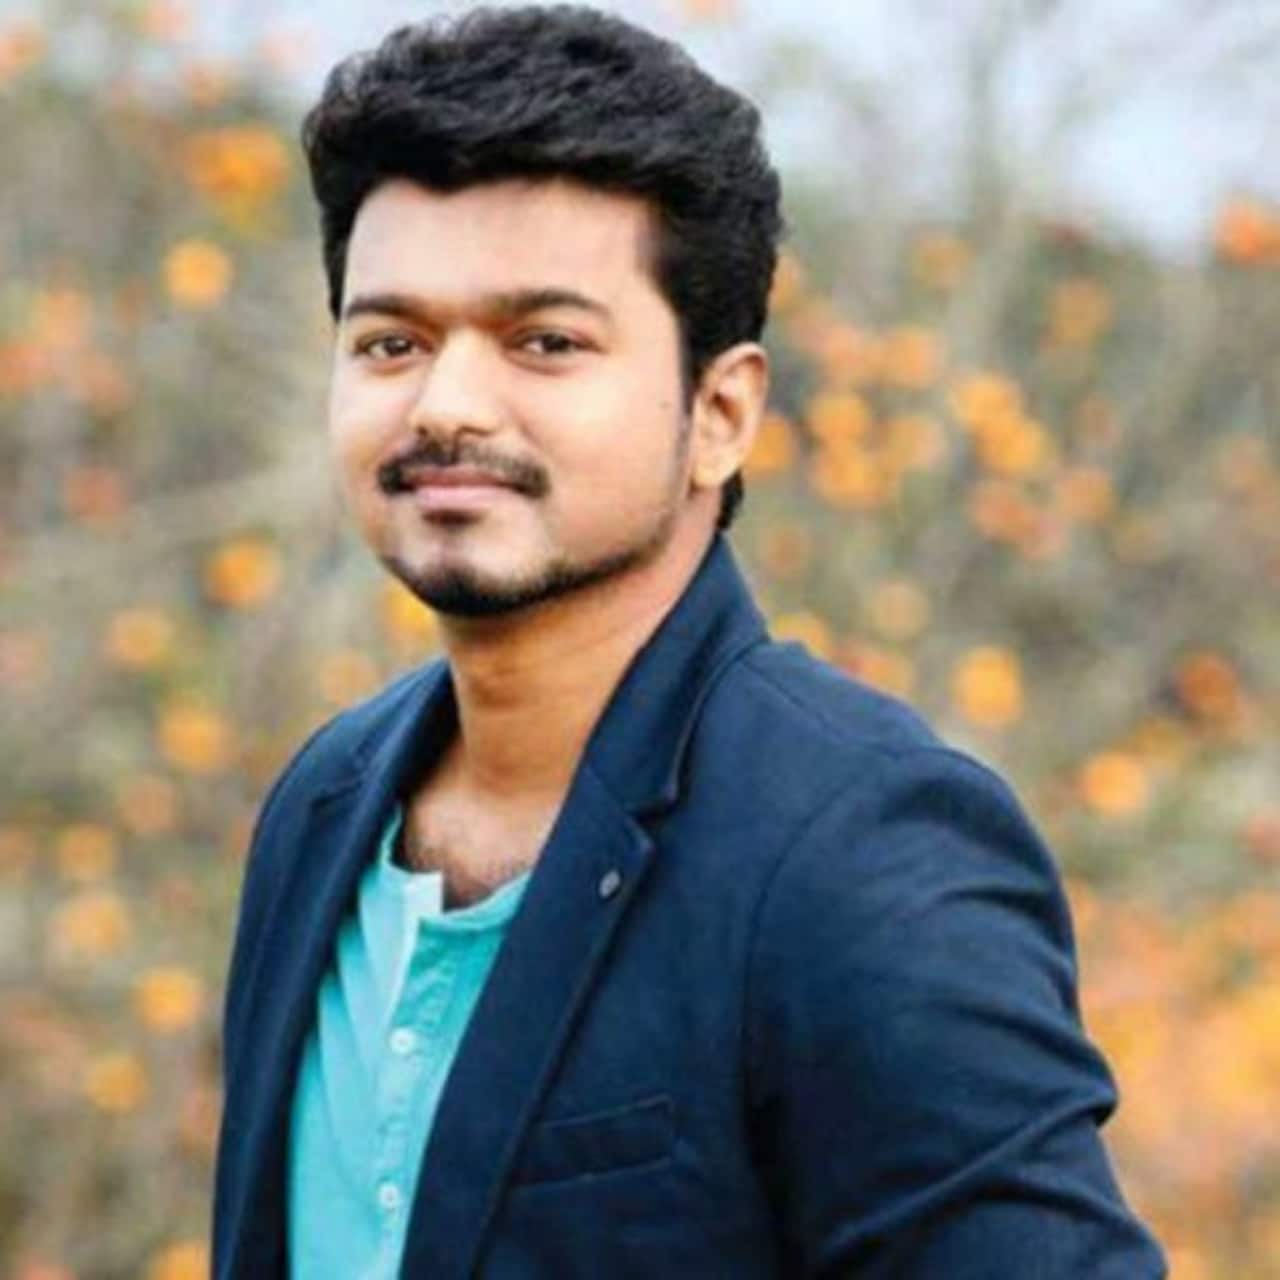 On Thalapathy Vijay's birthday, take this quiz on the superstar's personal and professional life and prove you are his BIGGEST FAN